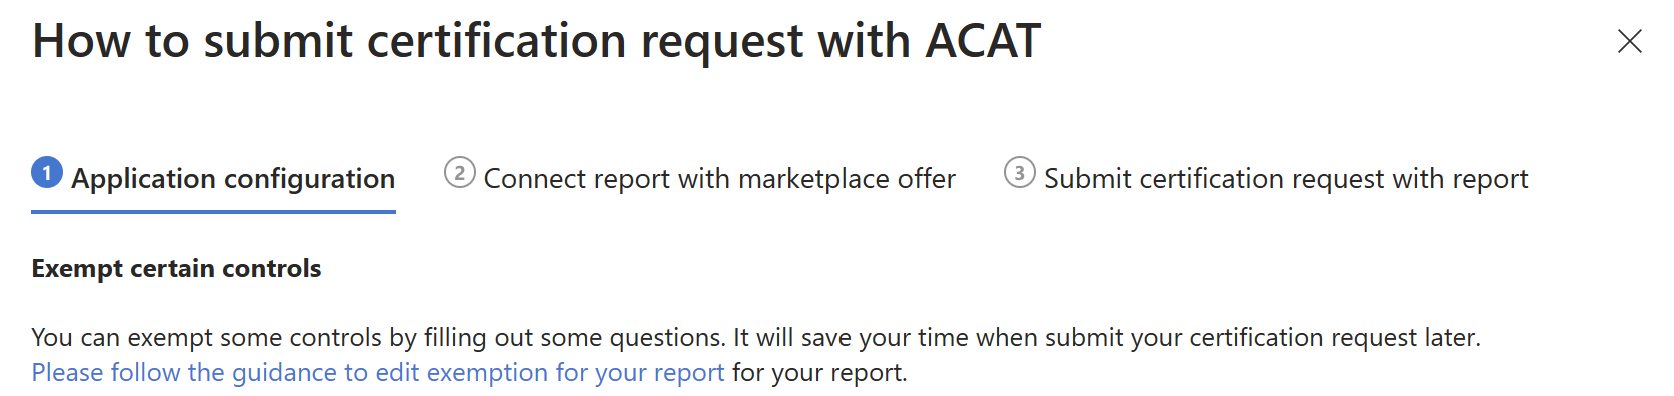 Guidance of submit certification with ACAT